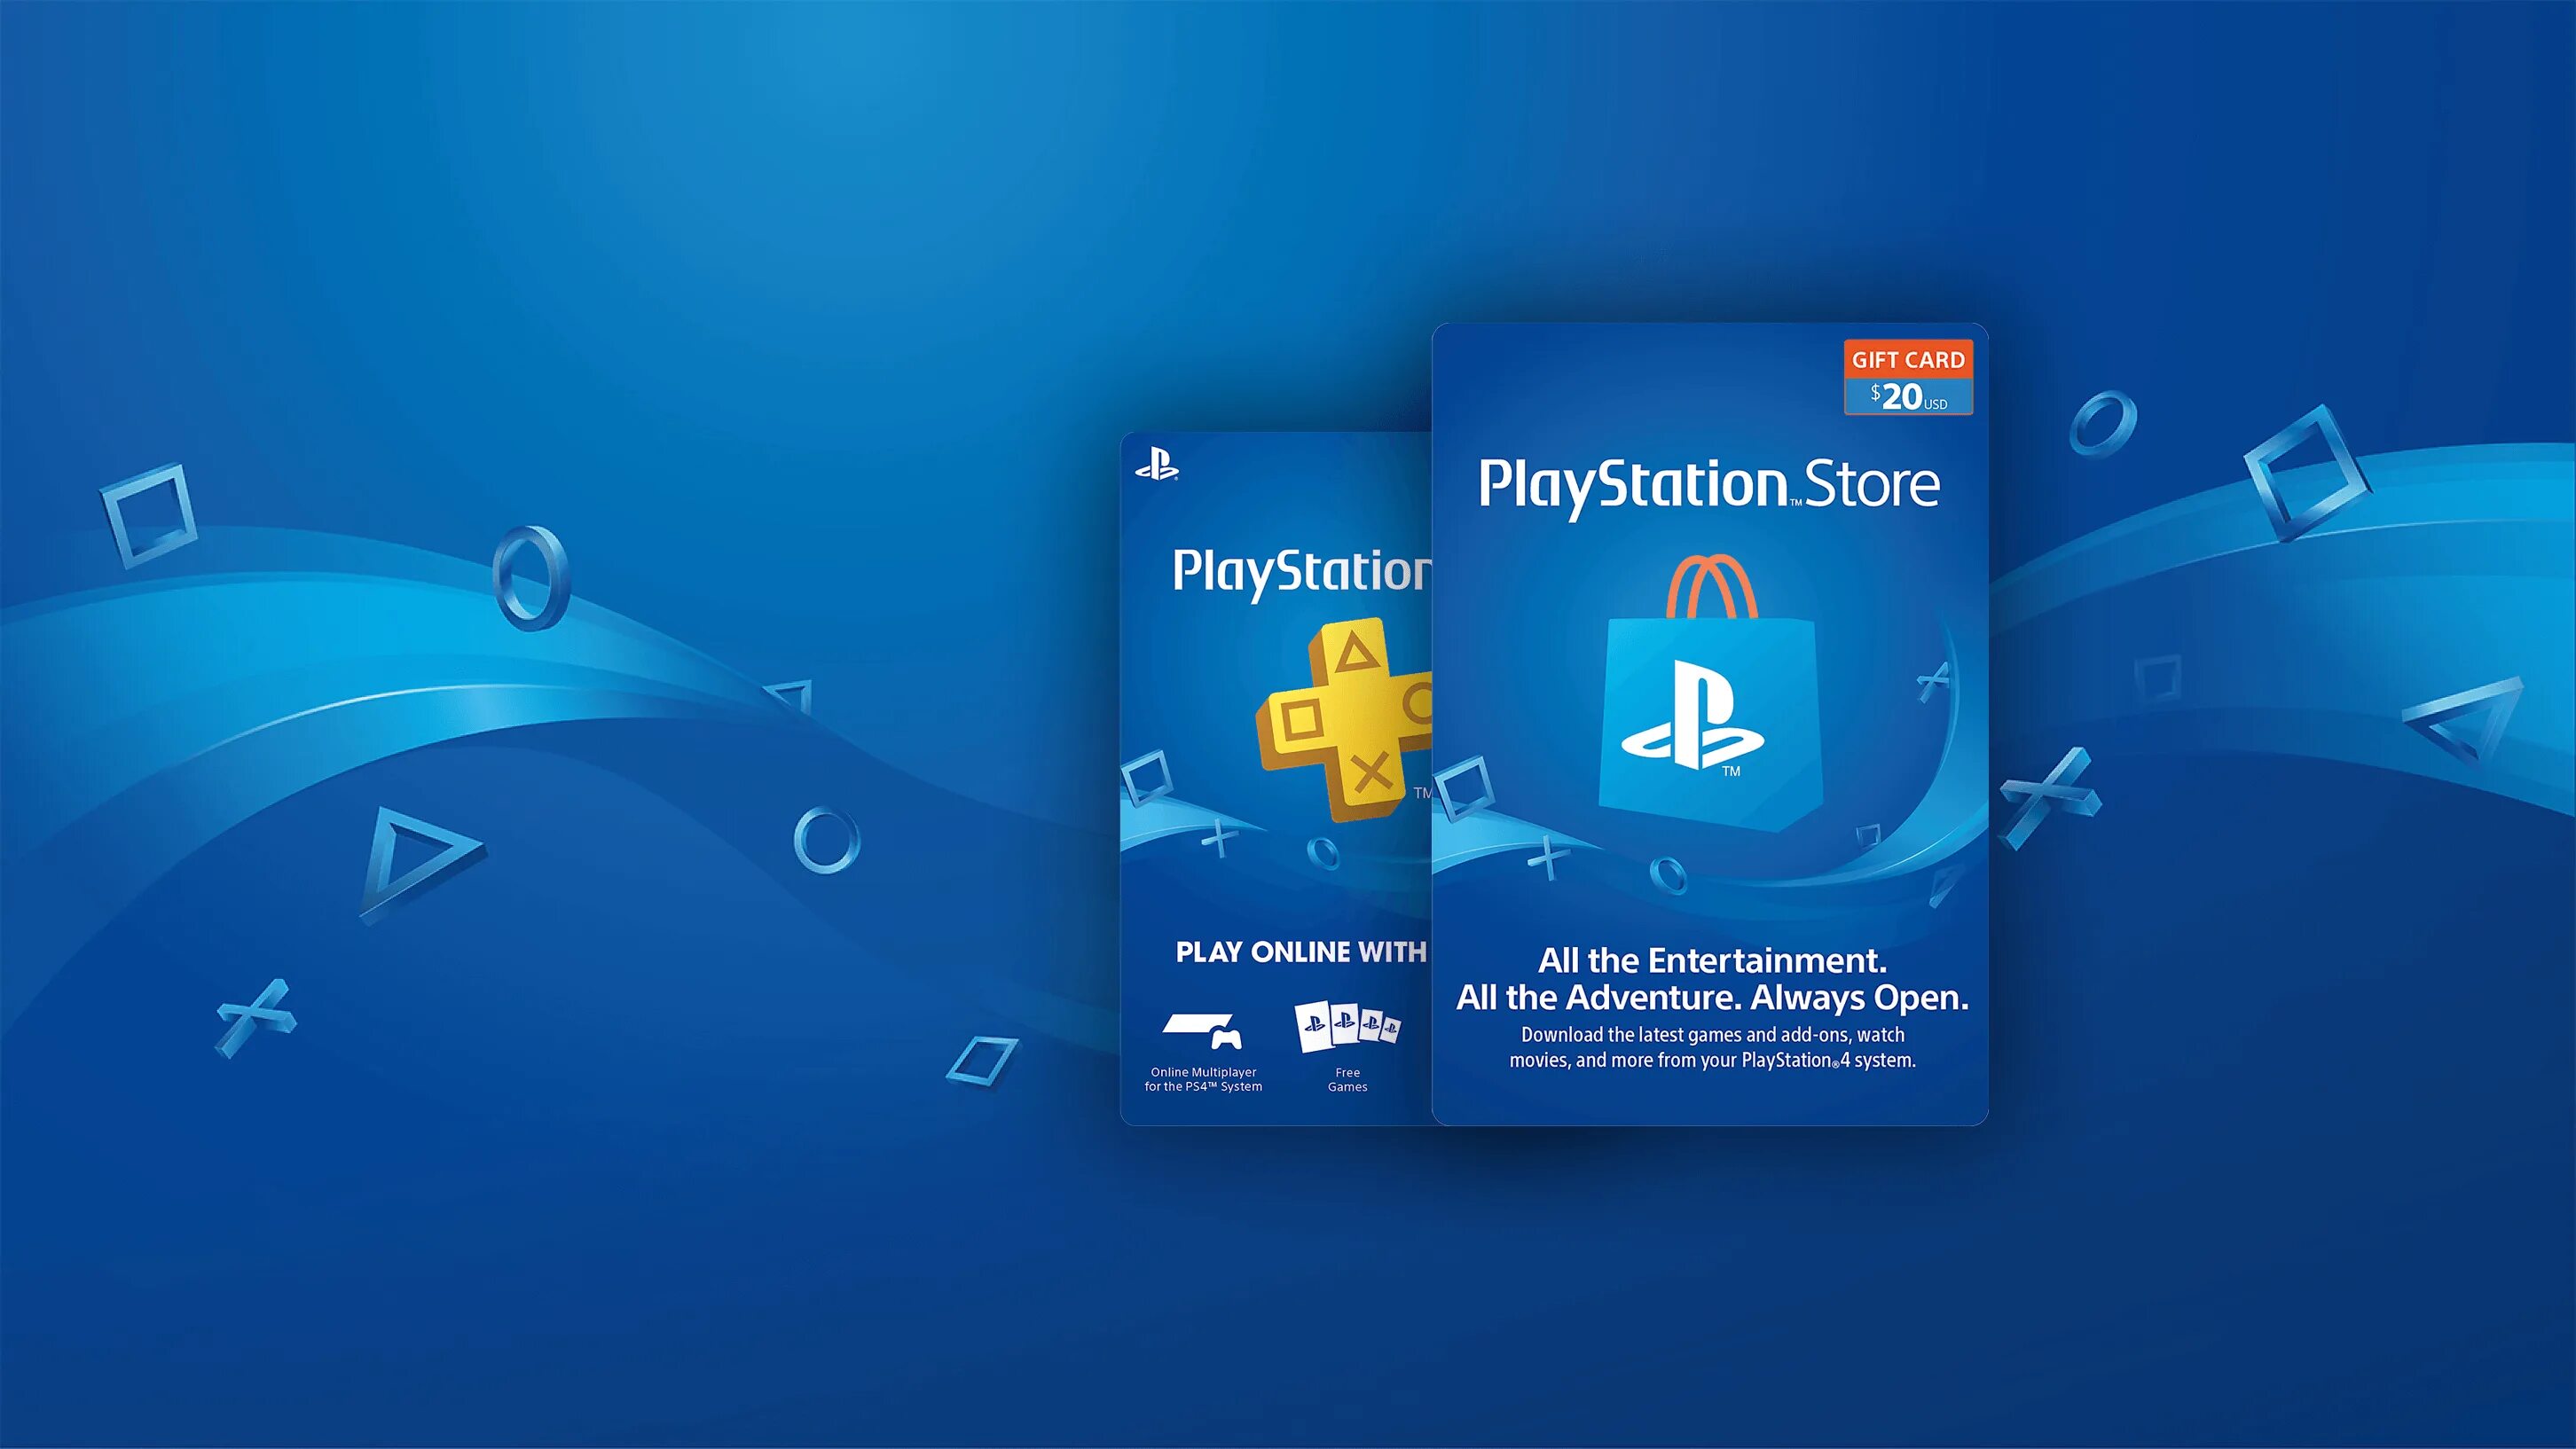 Ps store turkey подписка. PLAYSTATION Plus Gift Card. PS Sony PLAYSTATION Store. Карта Sony PLAYSTATION Plus Turkey. Sony PLAYSTATION Store Турция.